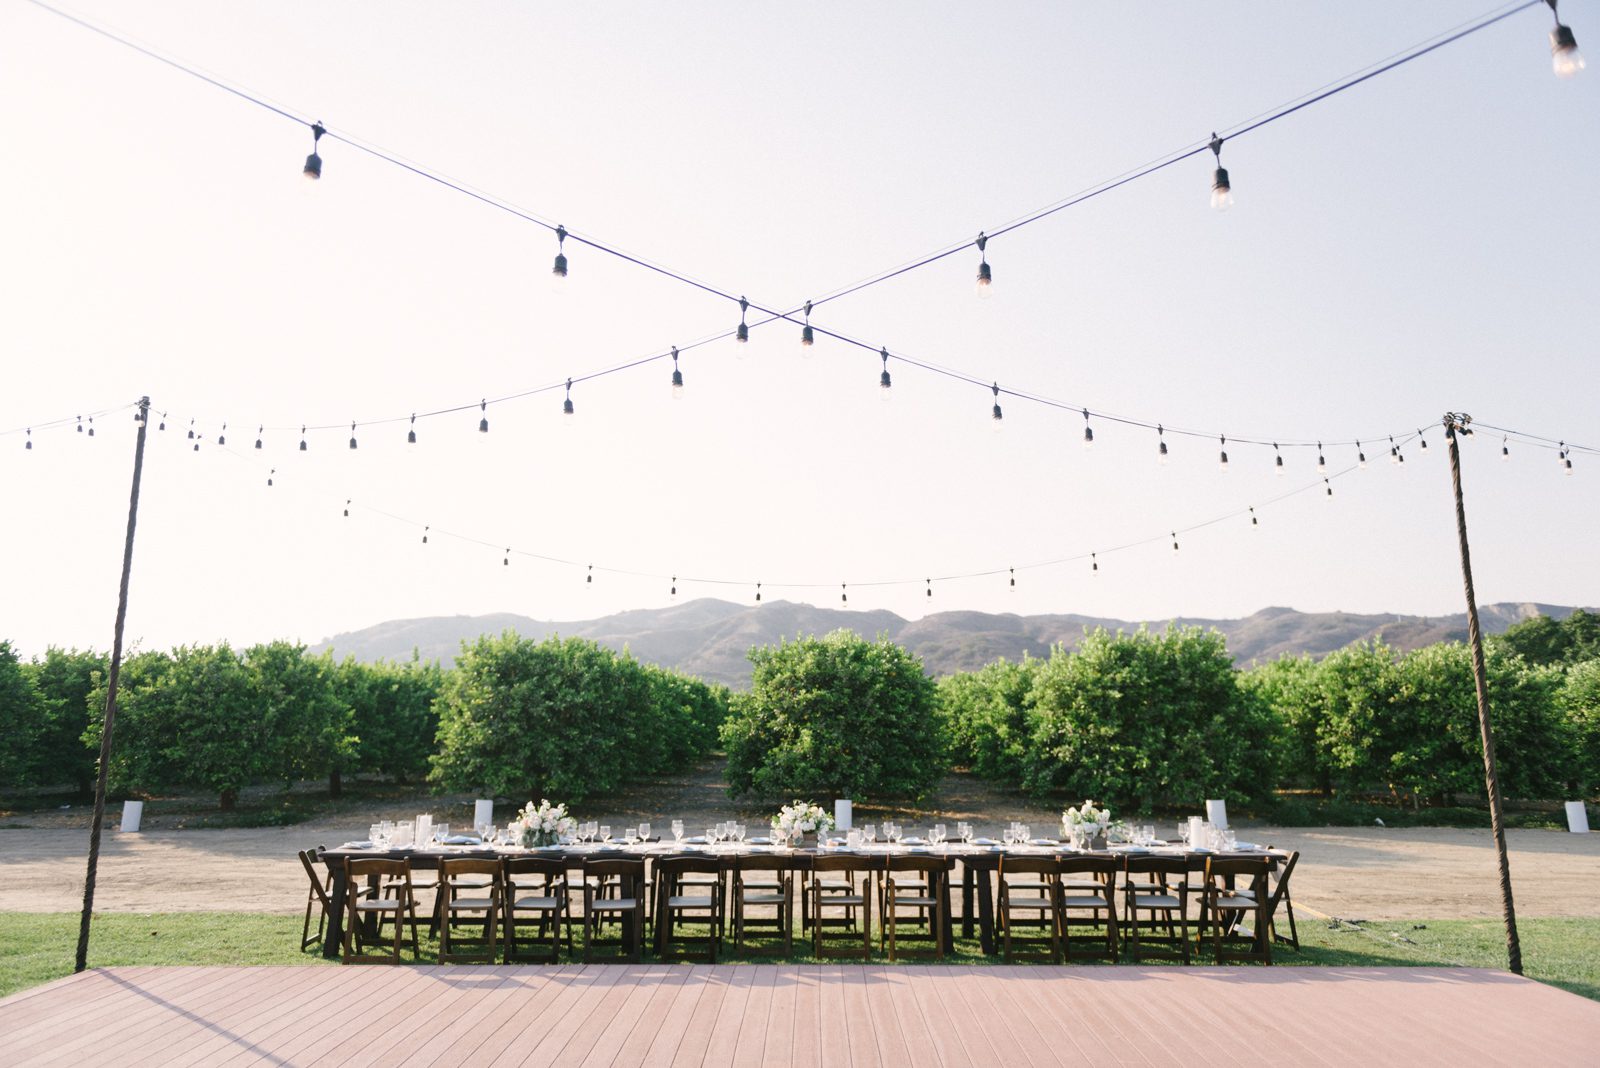 Table scape at Limoneira Ranch Wedding by San Luis Obispo Wedding Photographer Yvonne Goll Photography